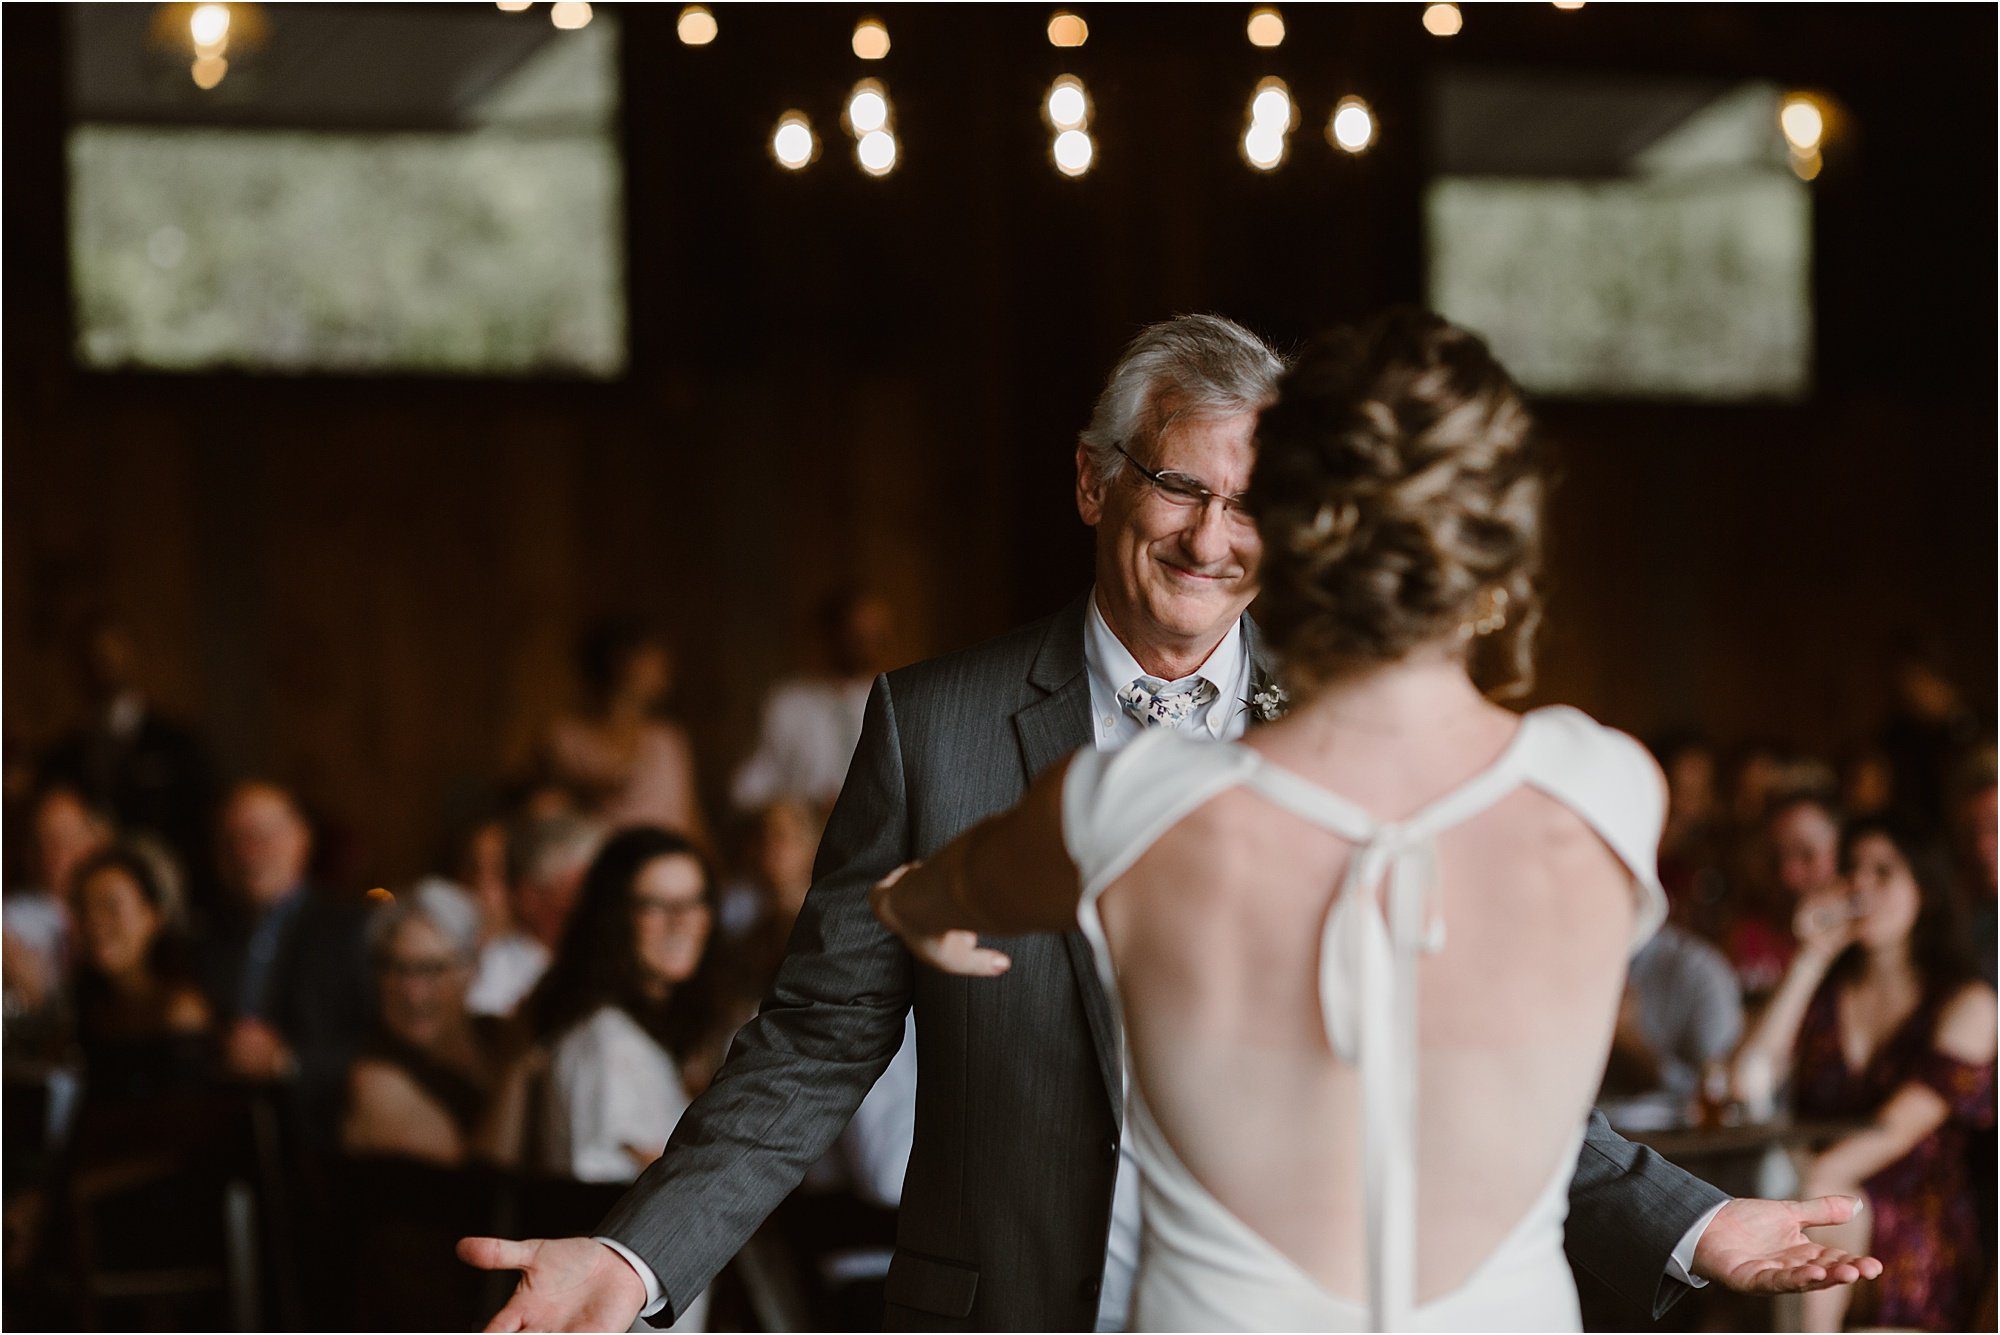 bride dances with her father at wedding reception